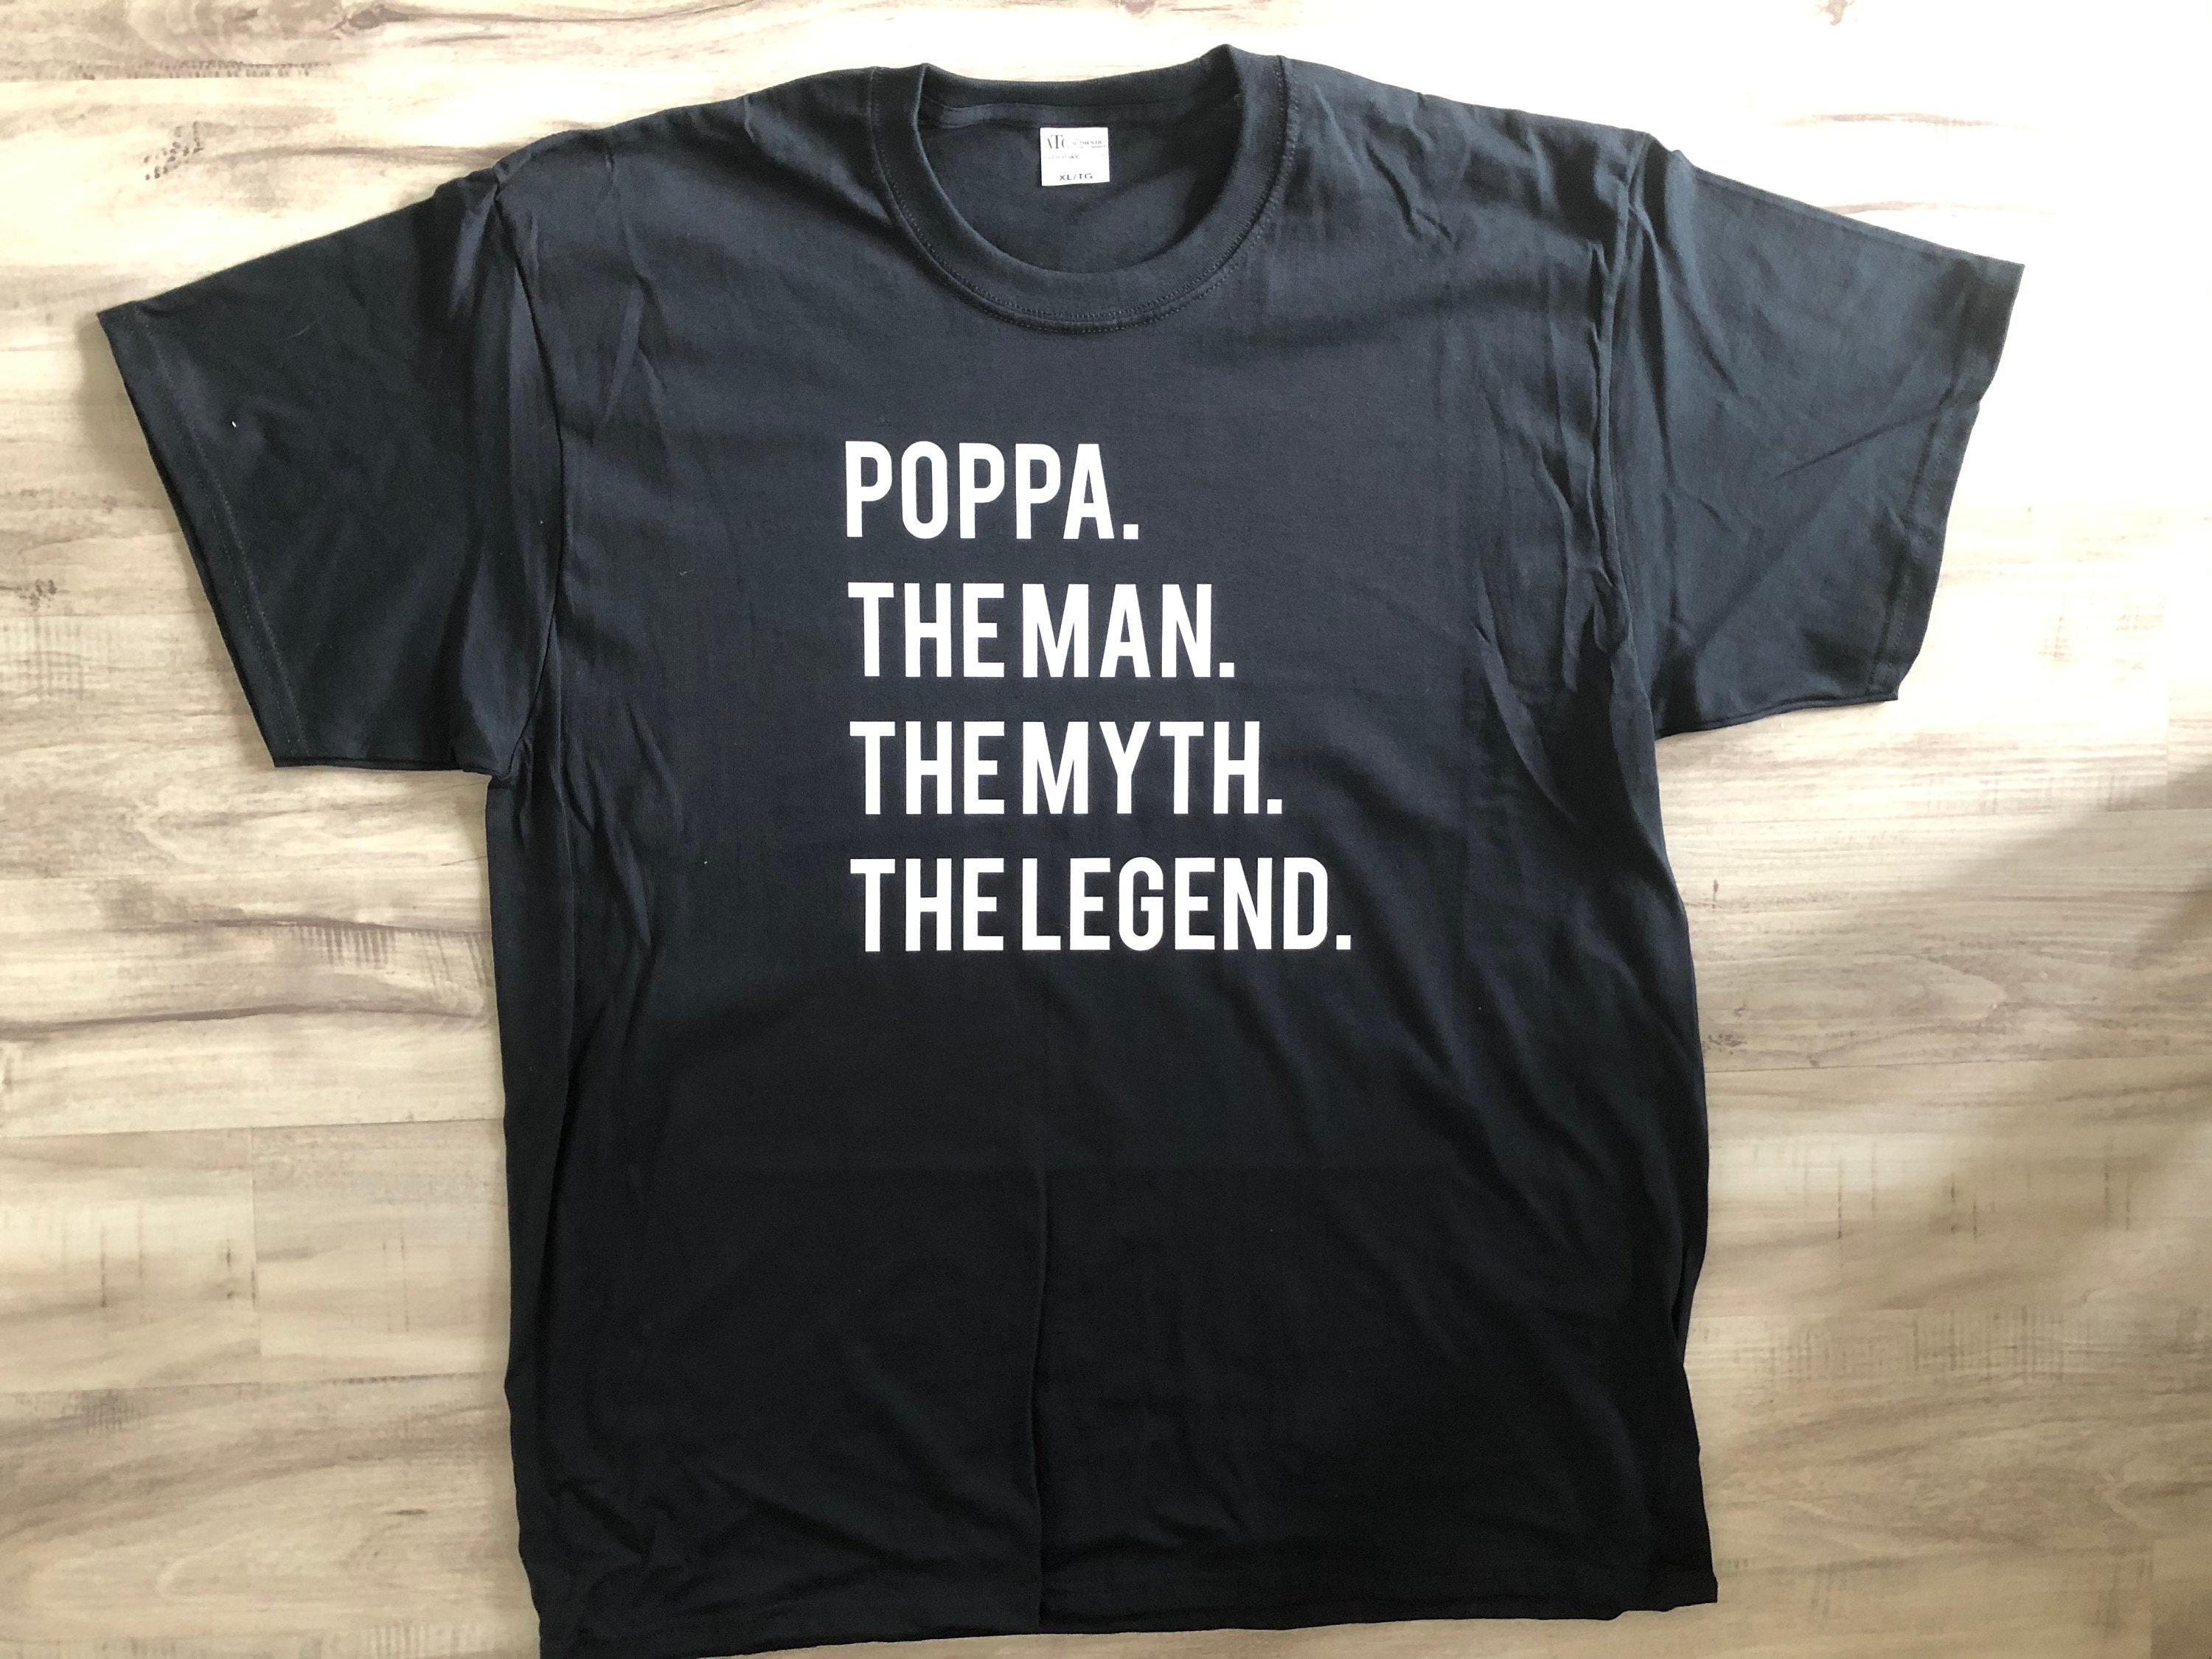 The Man the Myth the Legend T-shirt, the Man T's, the Myth Shirts, Dad T- shirts, Dad Shirts, Men's Shirts, Myth Shirts, Fathers Day T-shirts 